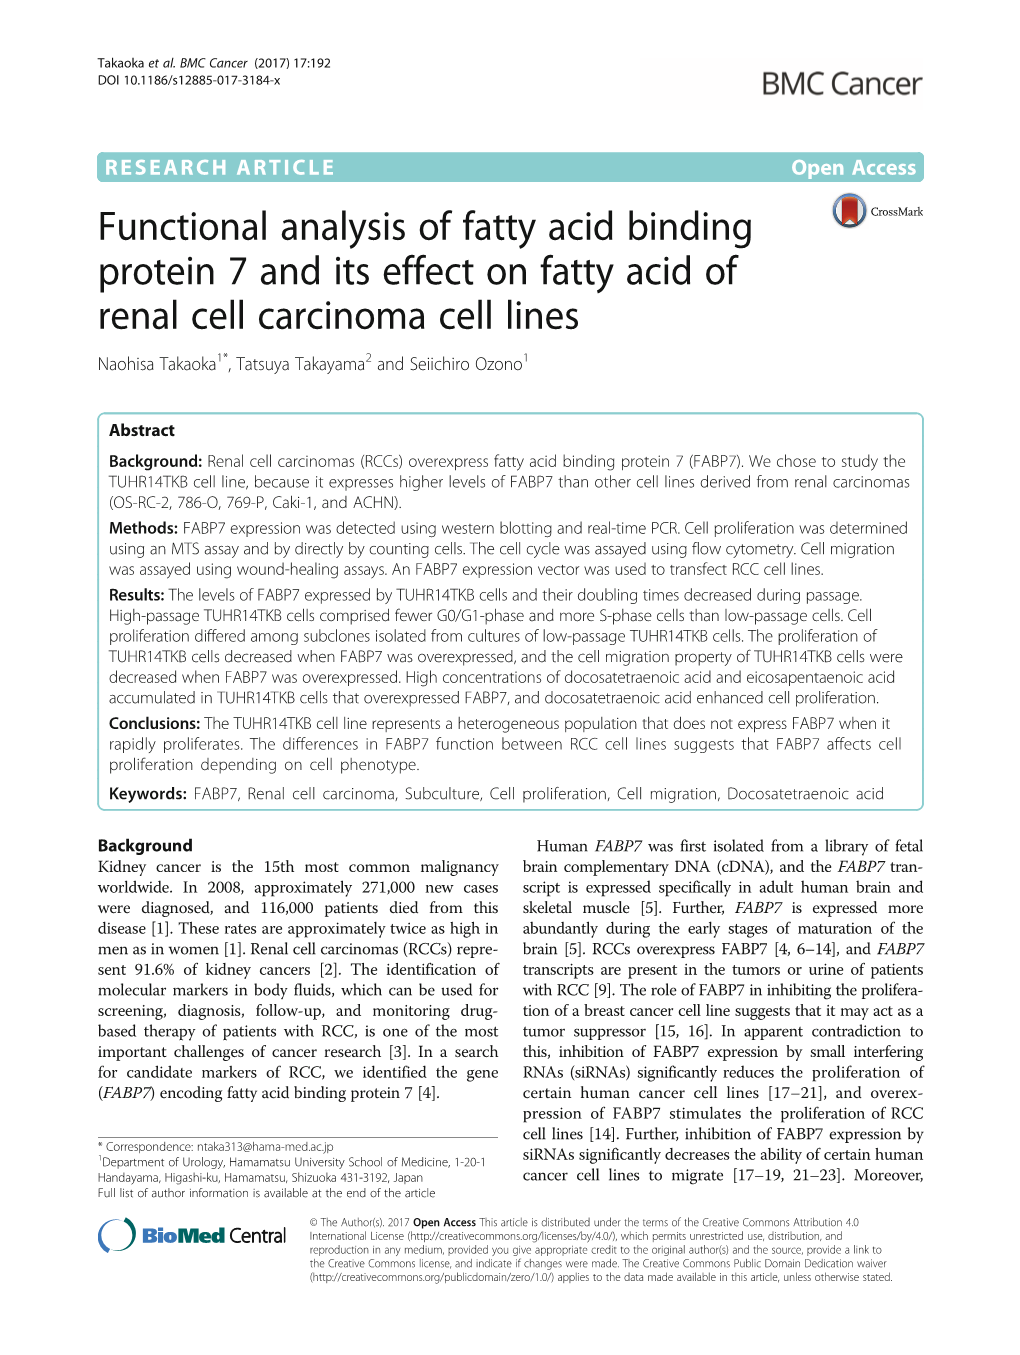 Functional Analysis of Fatty Acid Binding Protein 7 and Its Effect On